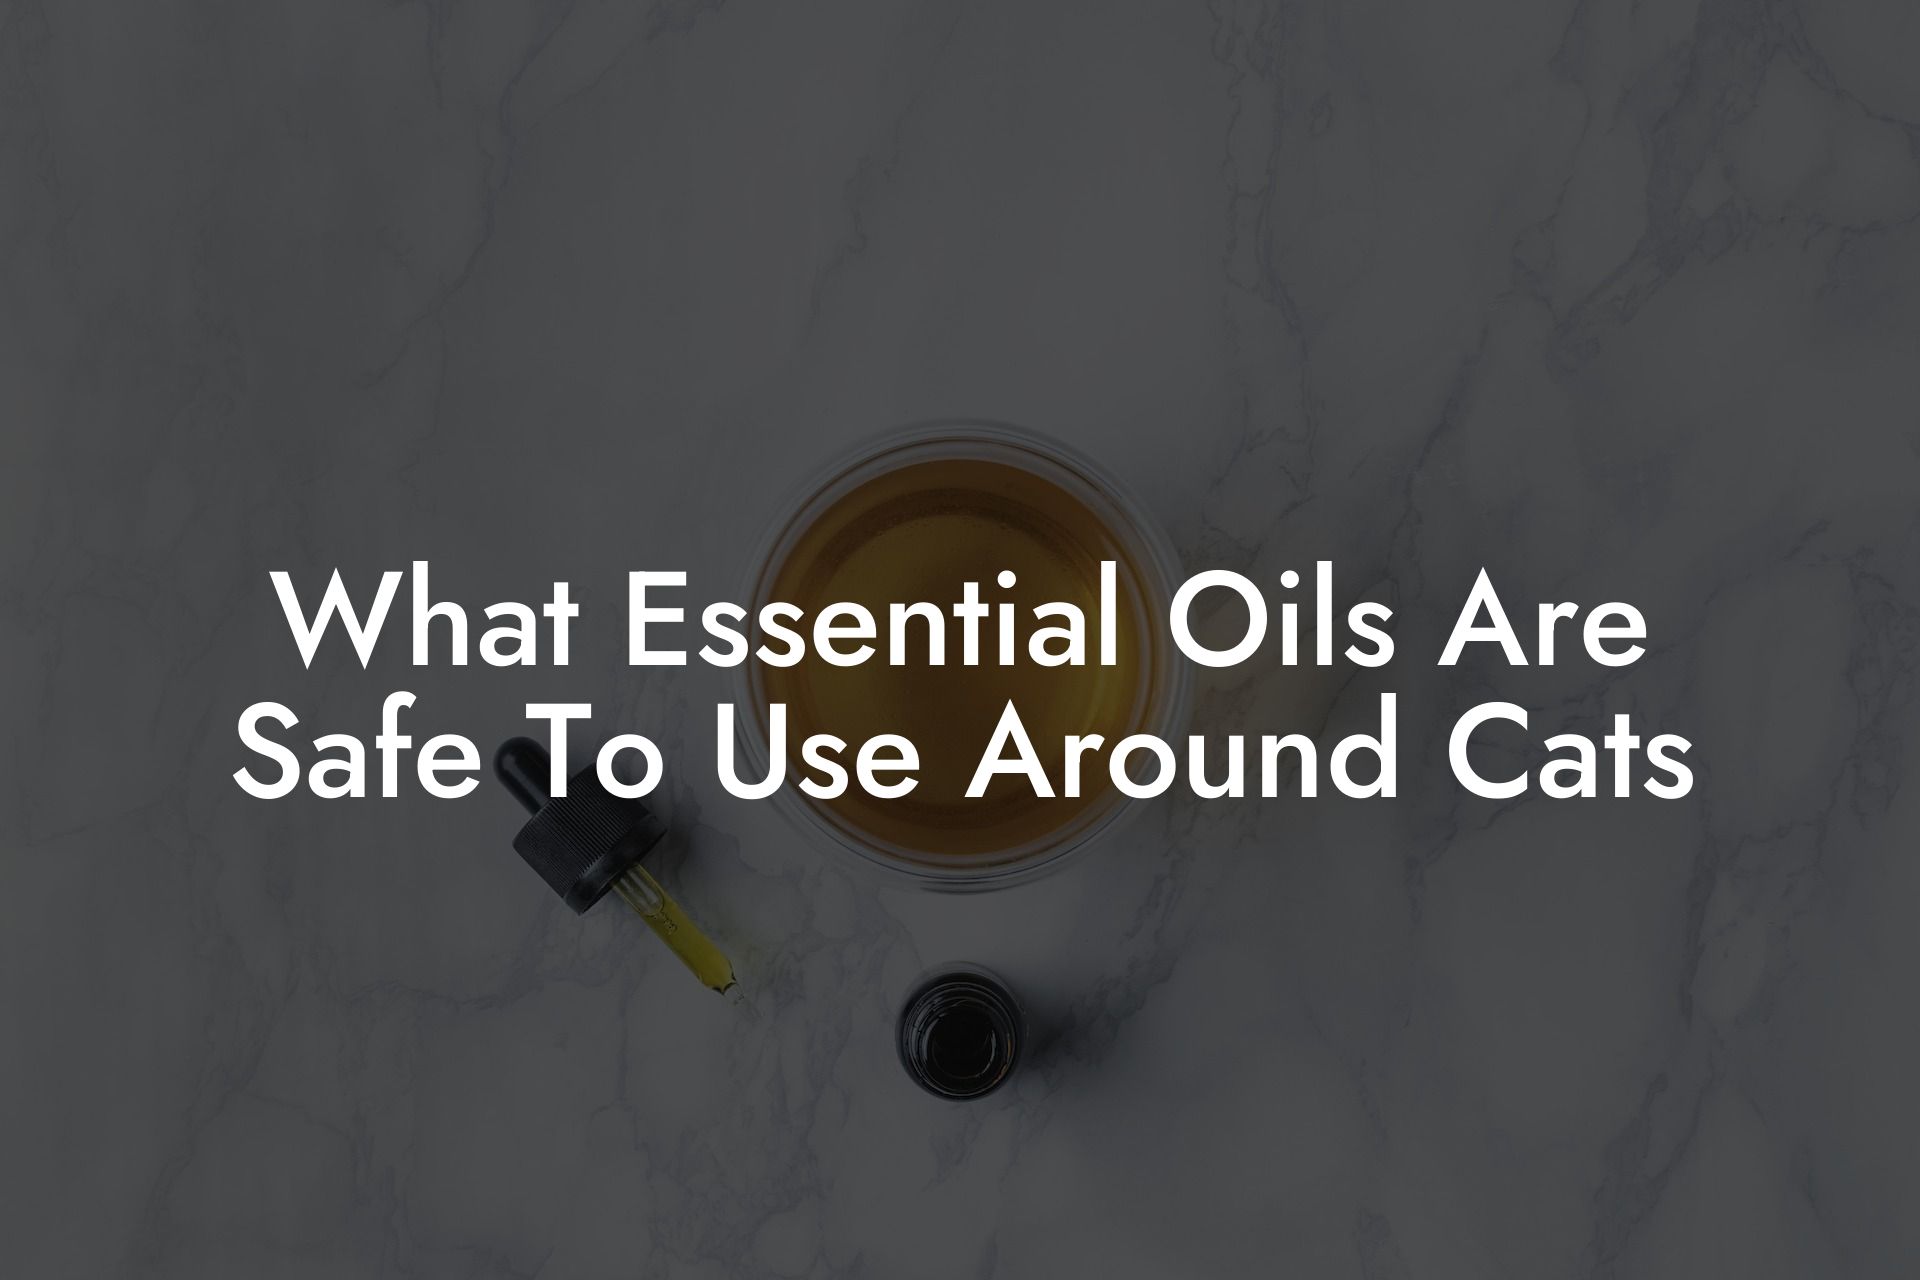 What Essential Oils Are Safe To Use Around Cats